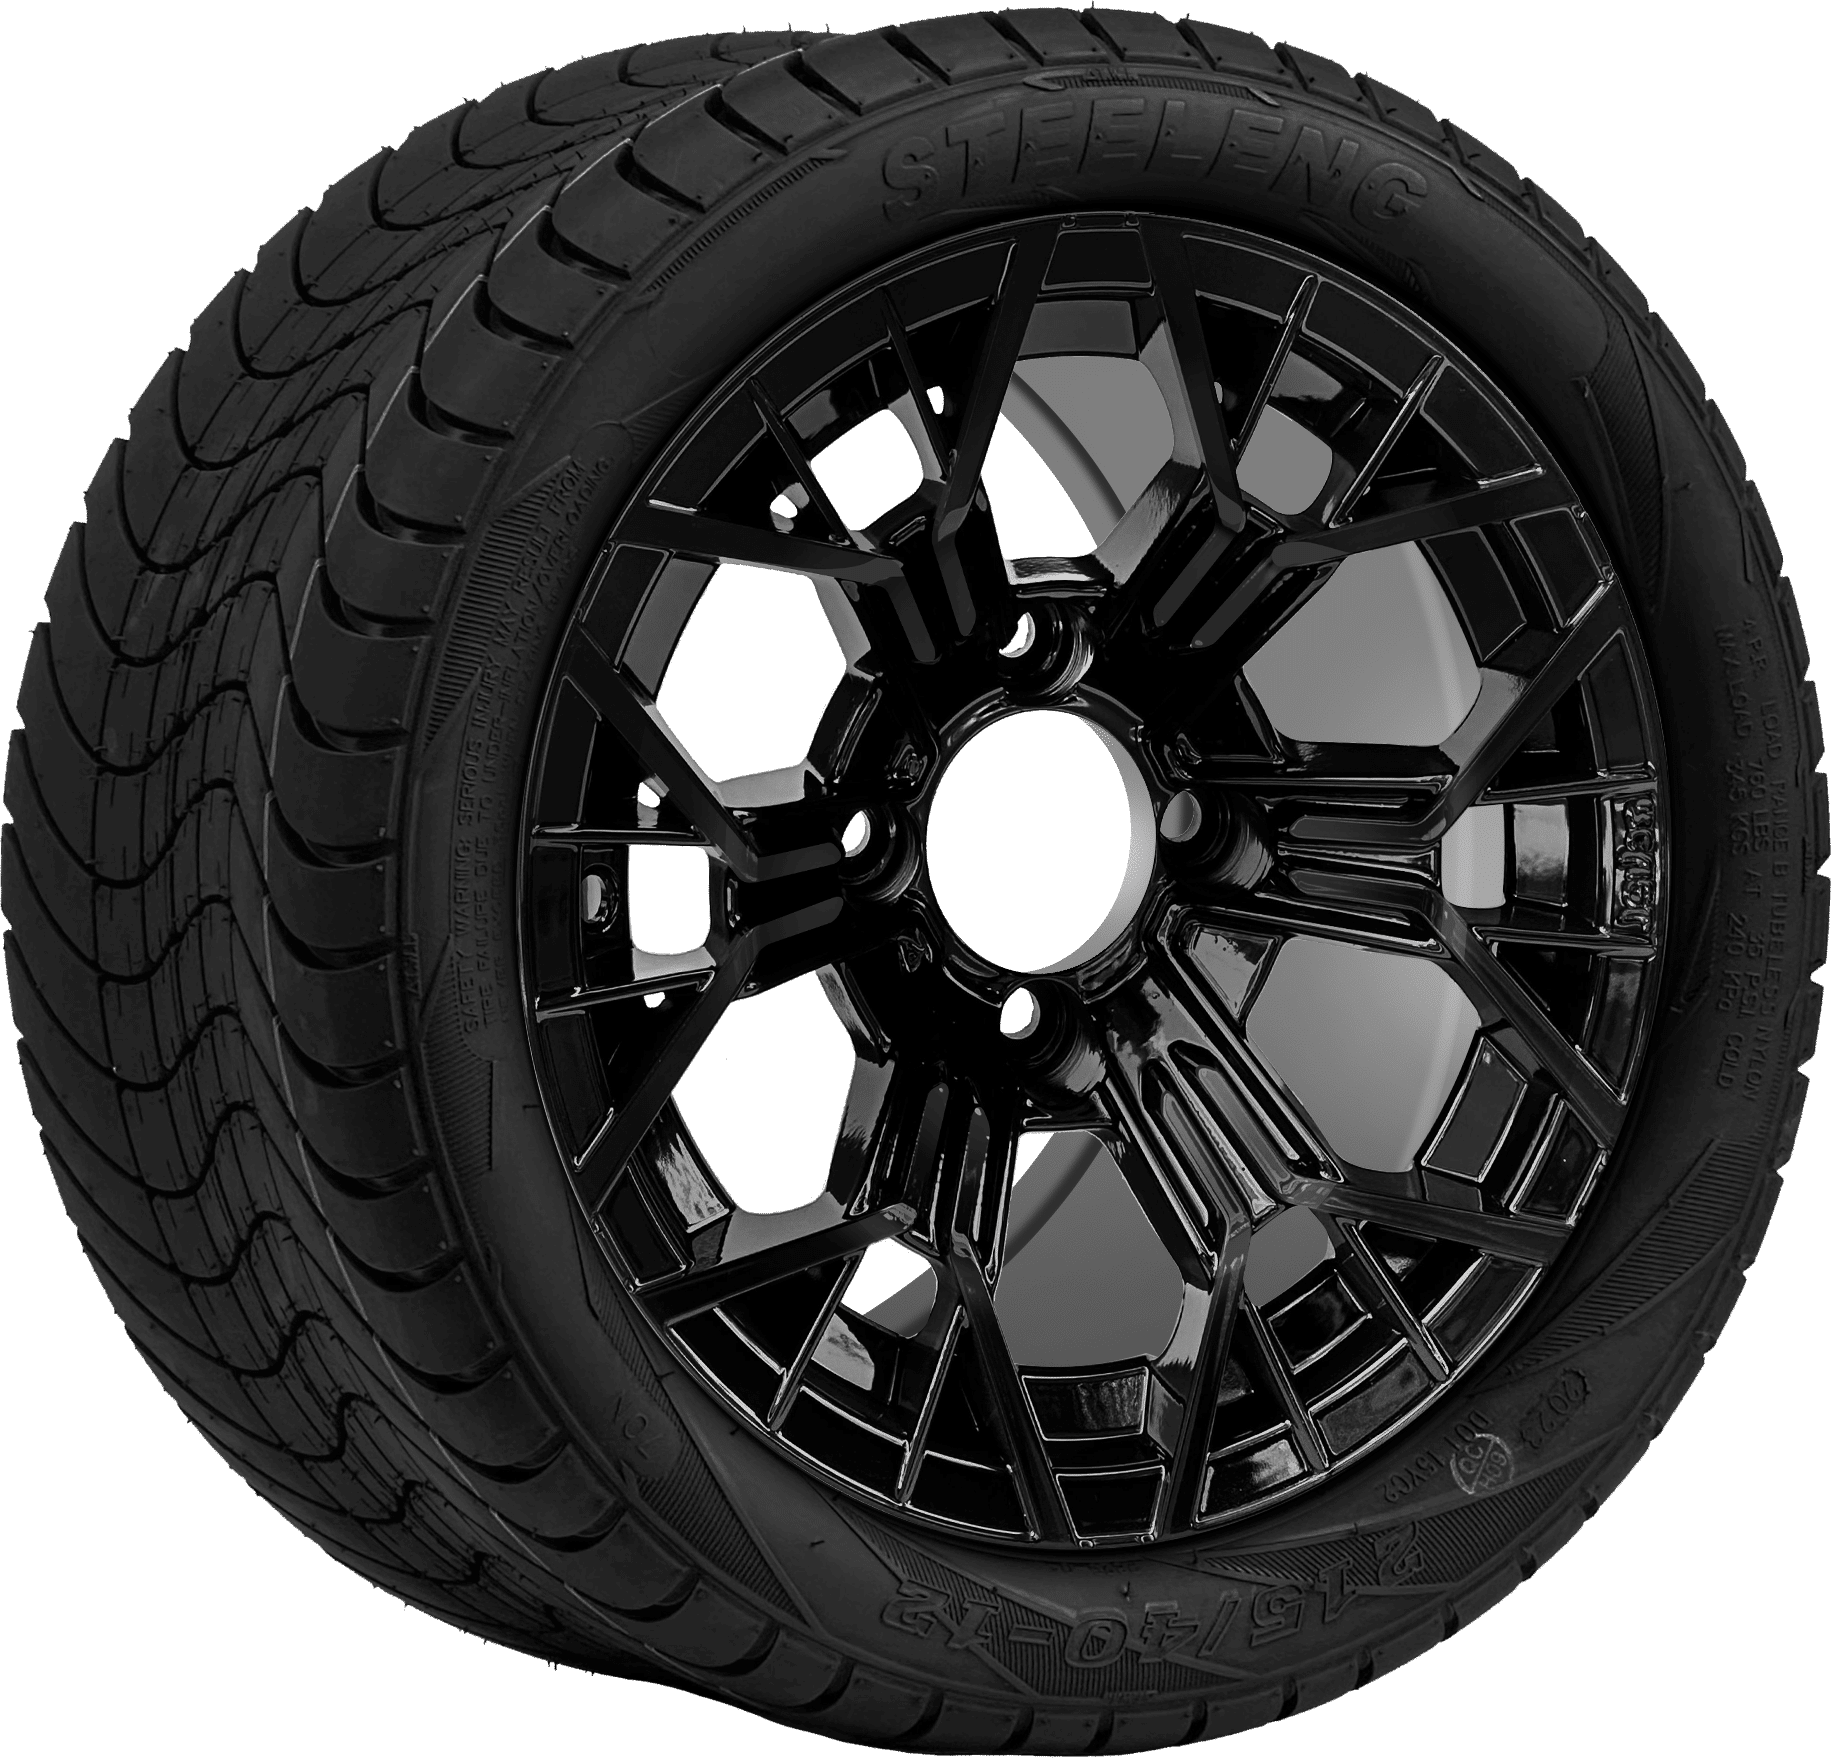 BNDL-TR1211-WH1268-CC0027-LN0002 12″ MANTIS GLOSSY BLACK WHEEL – ALUMINUM ALLOY / STEELENG 215/40-12 LOW PROFILE TIRE DOT APPROVED